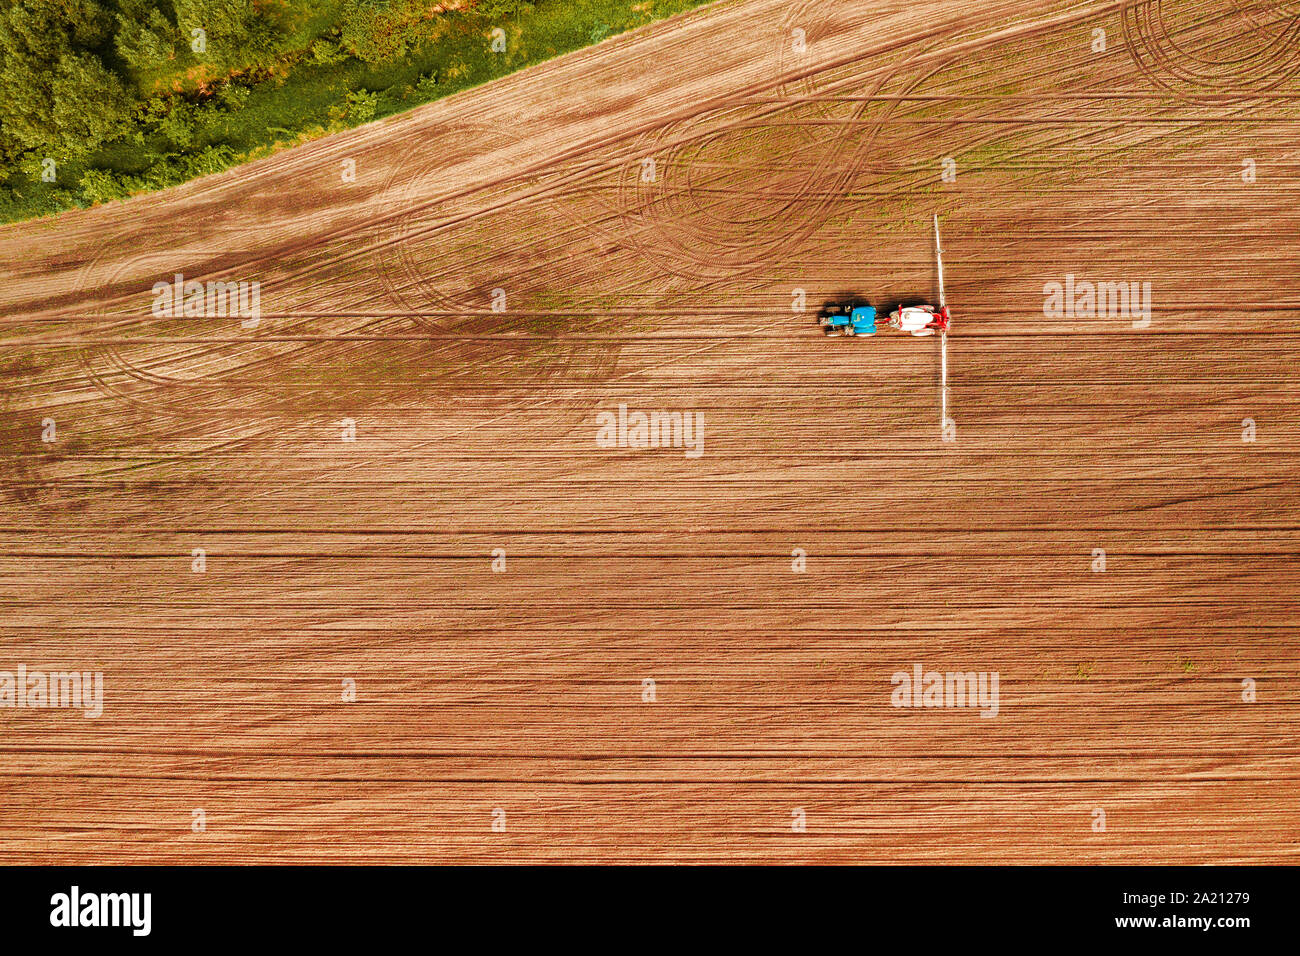 Tractor spraying crops in field, aerial view from drone pov Stock Photo